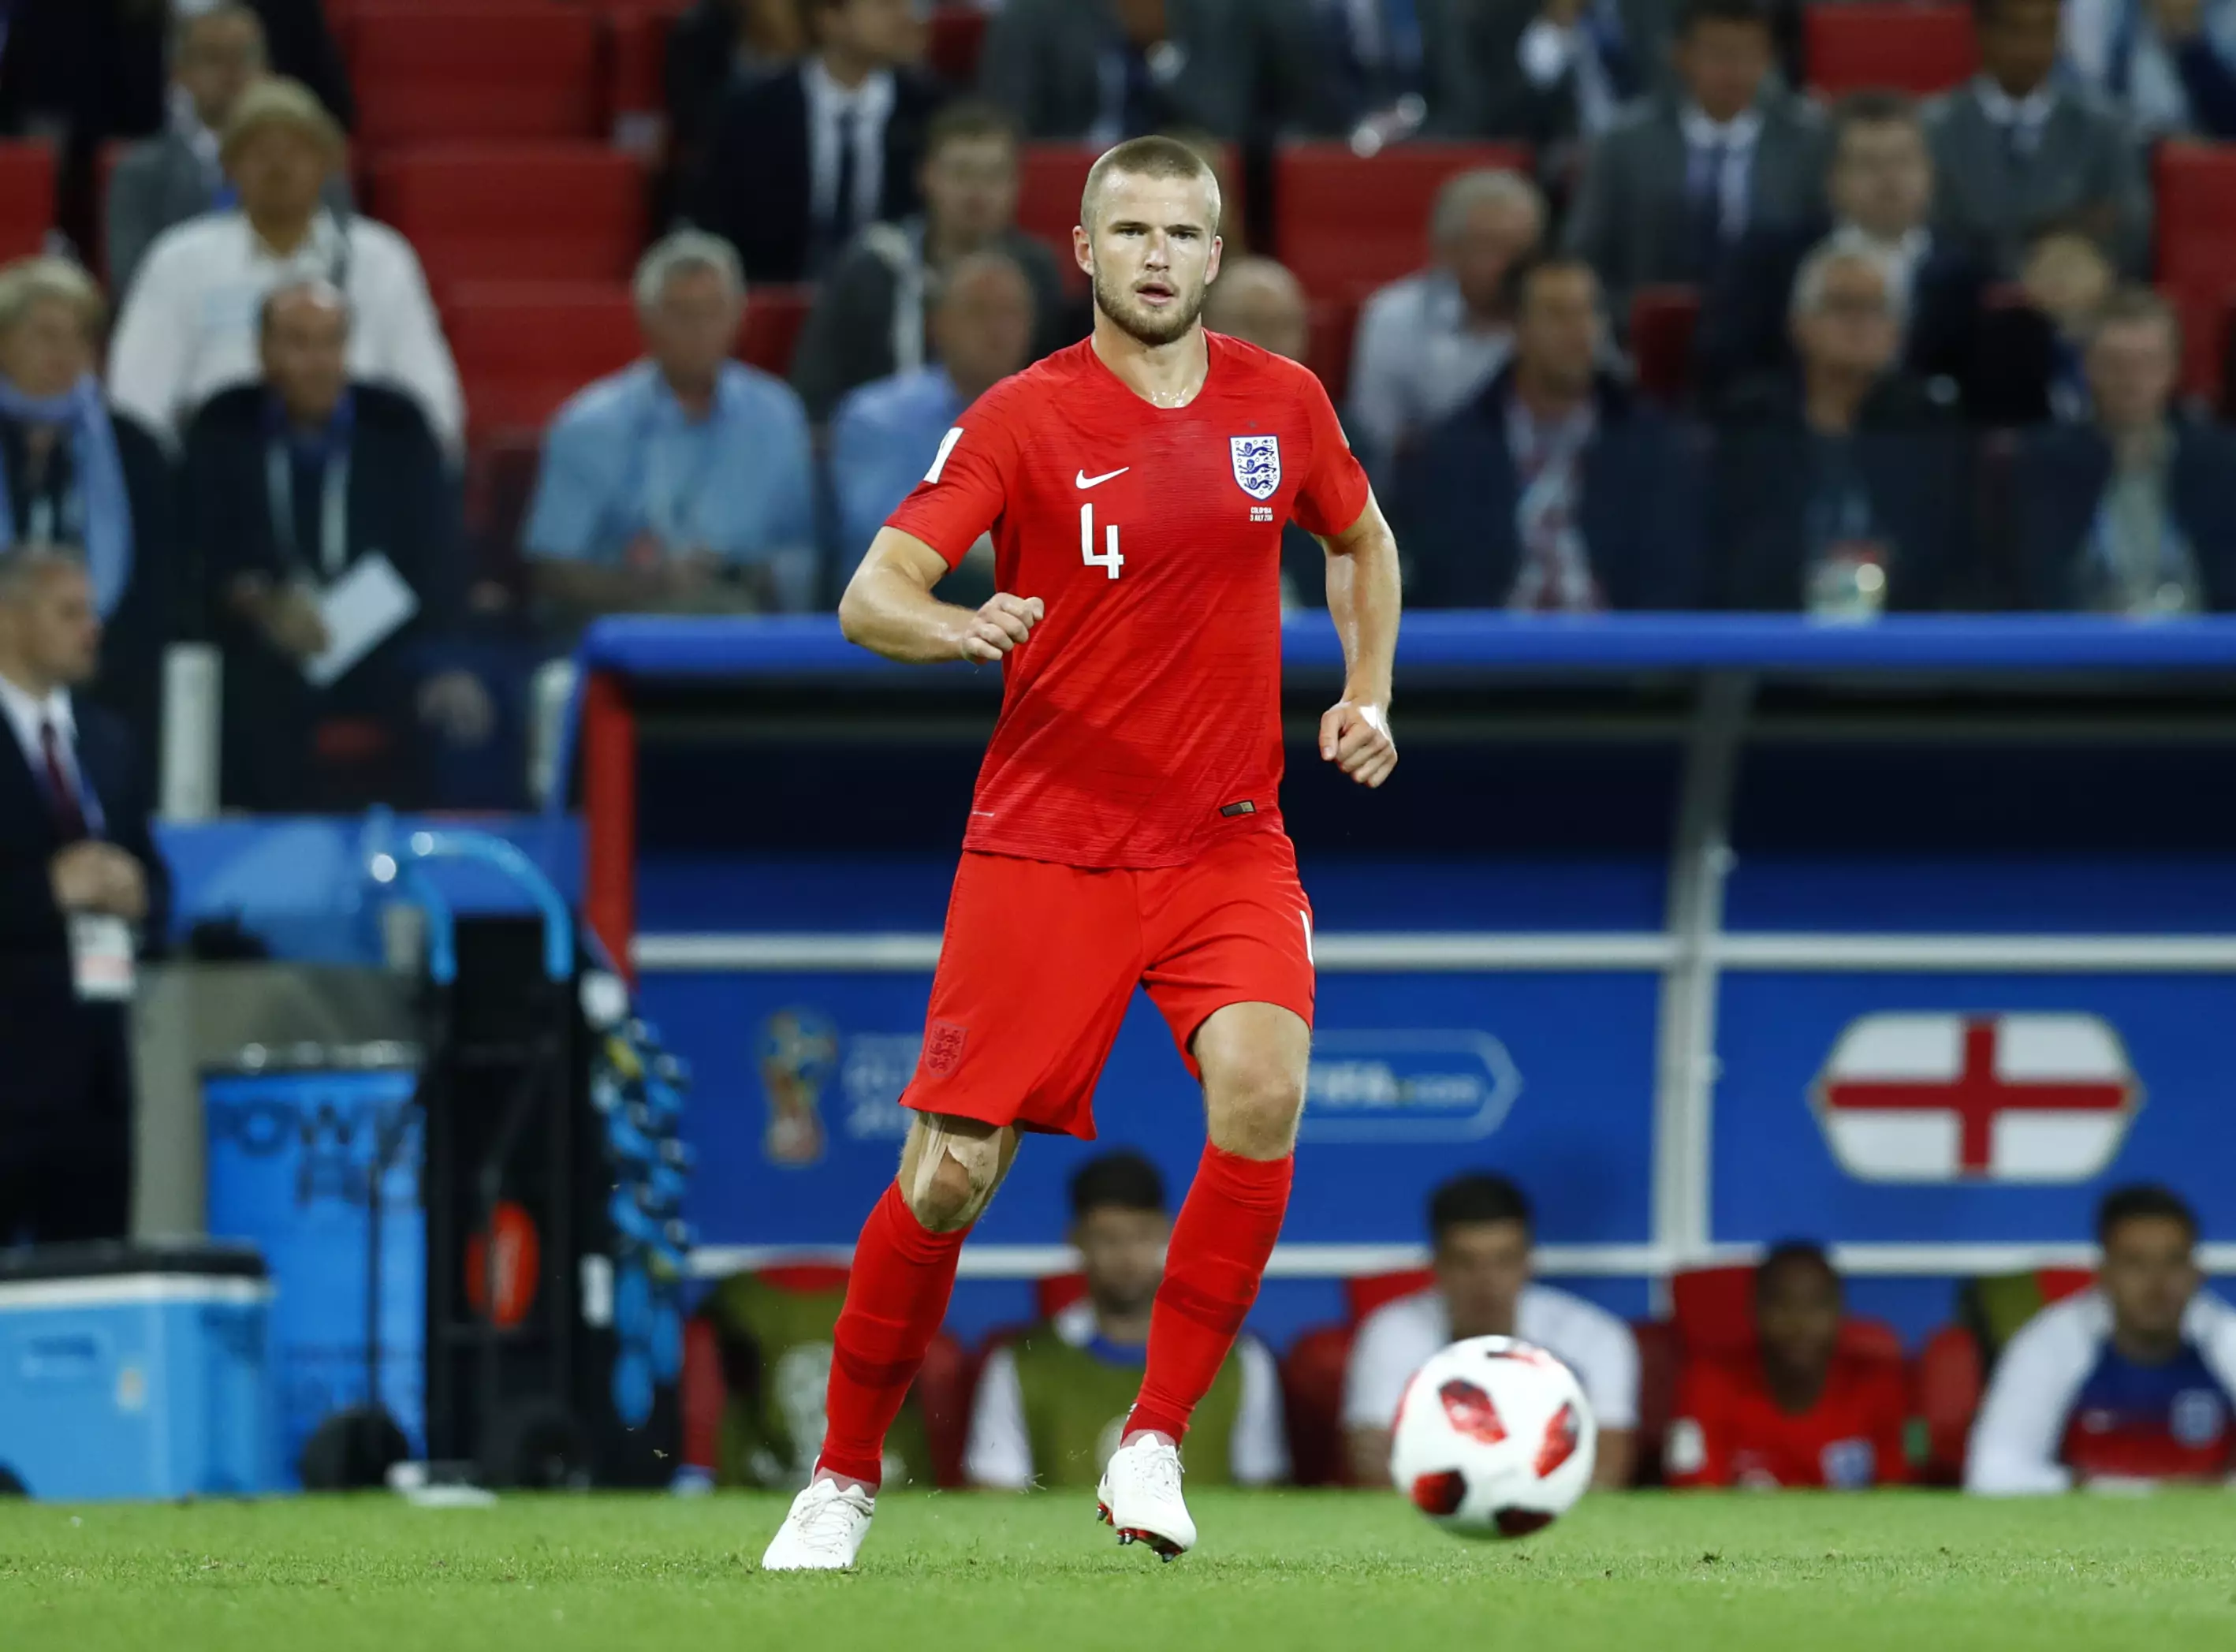 Dier in action for England. Image: PA